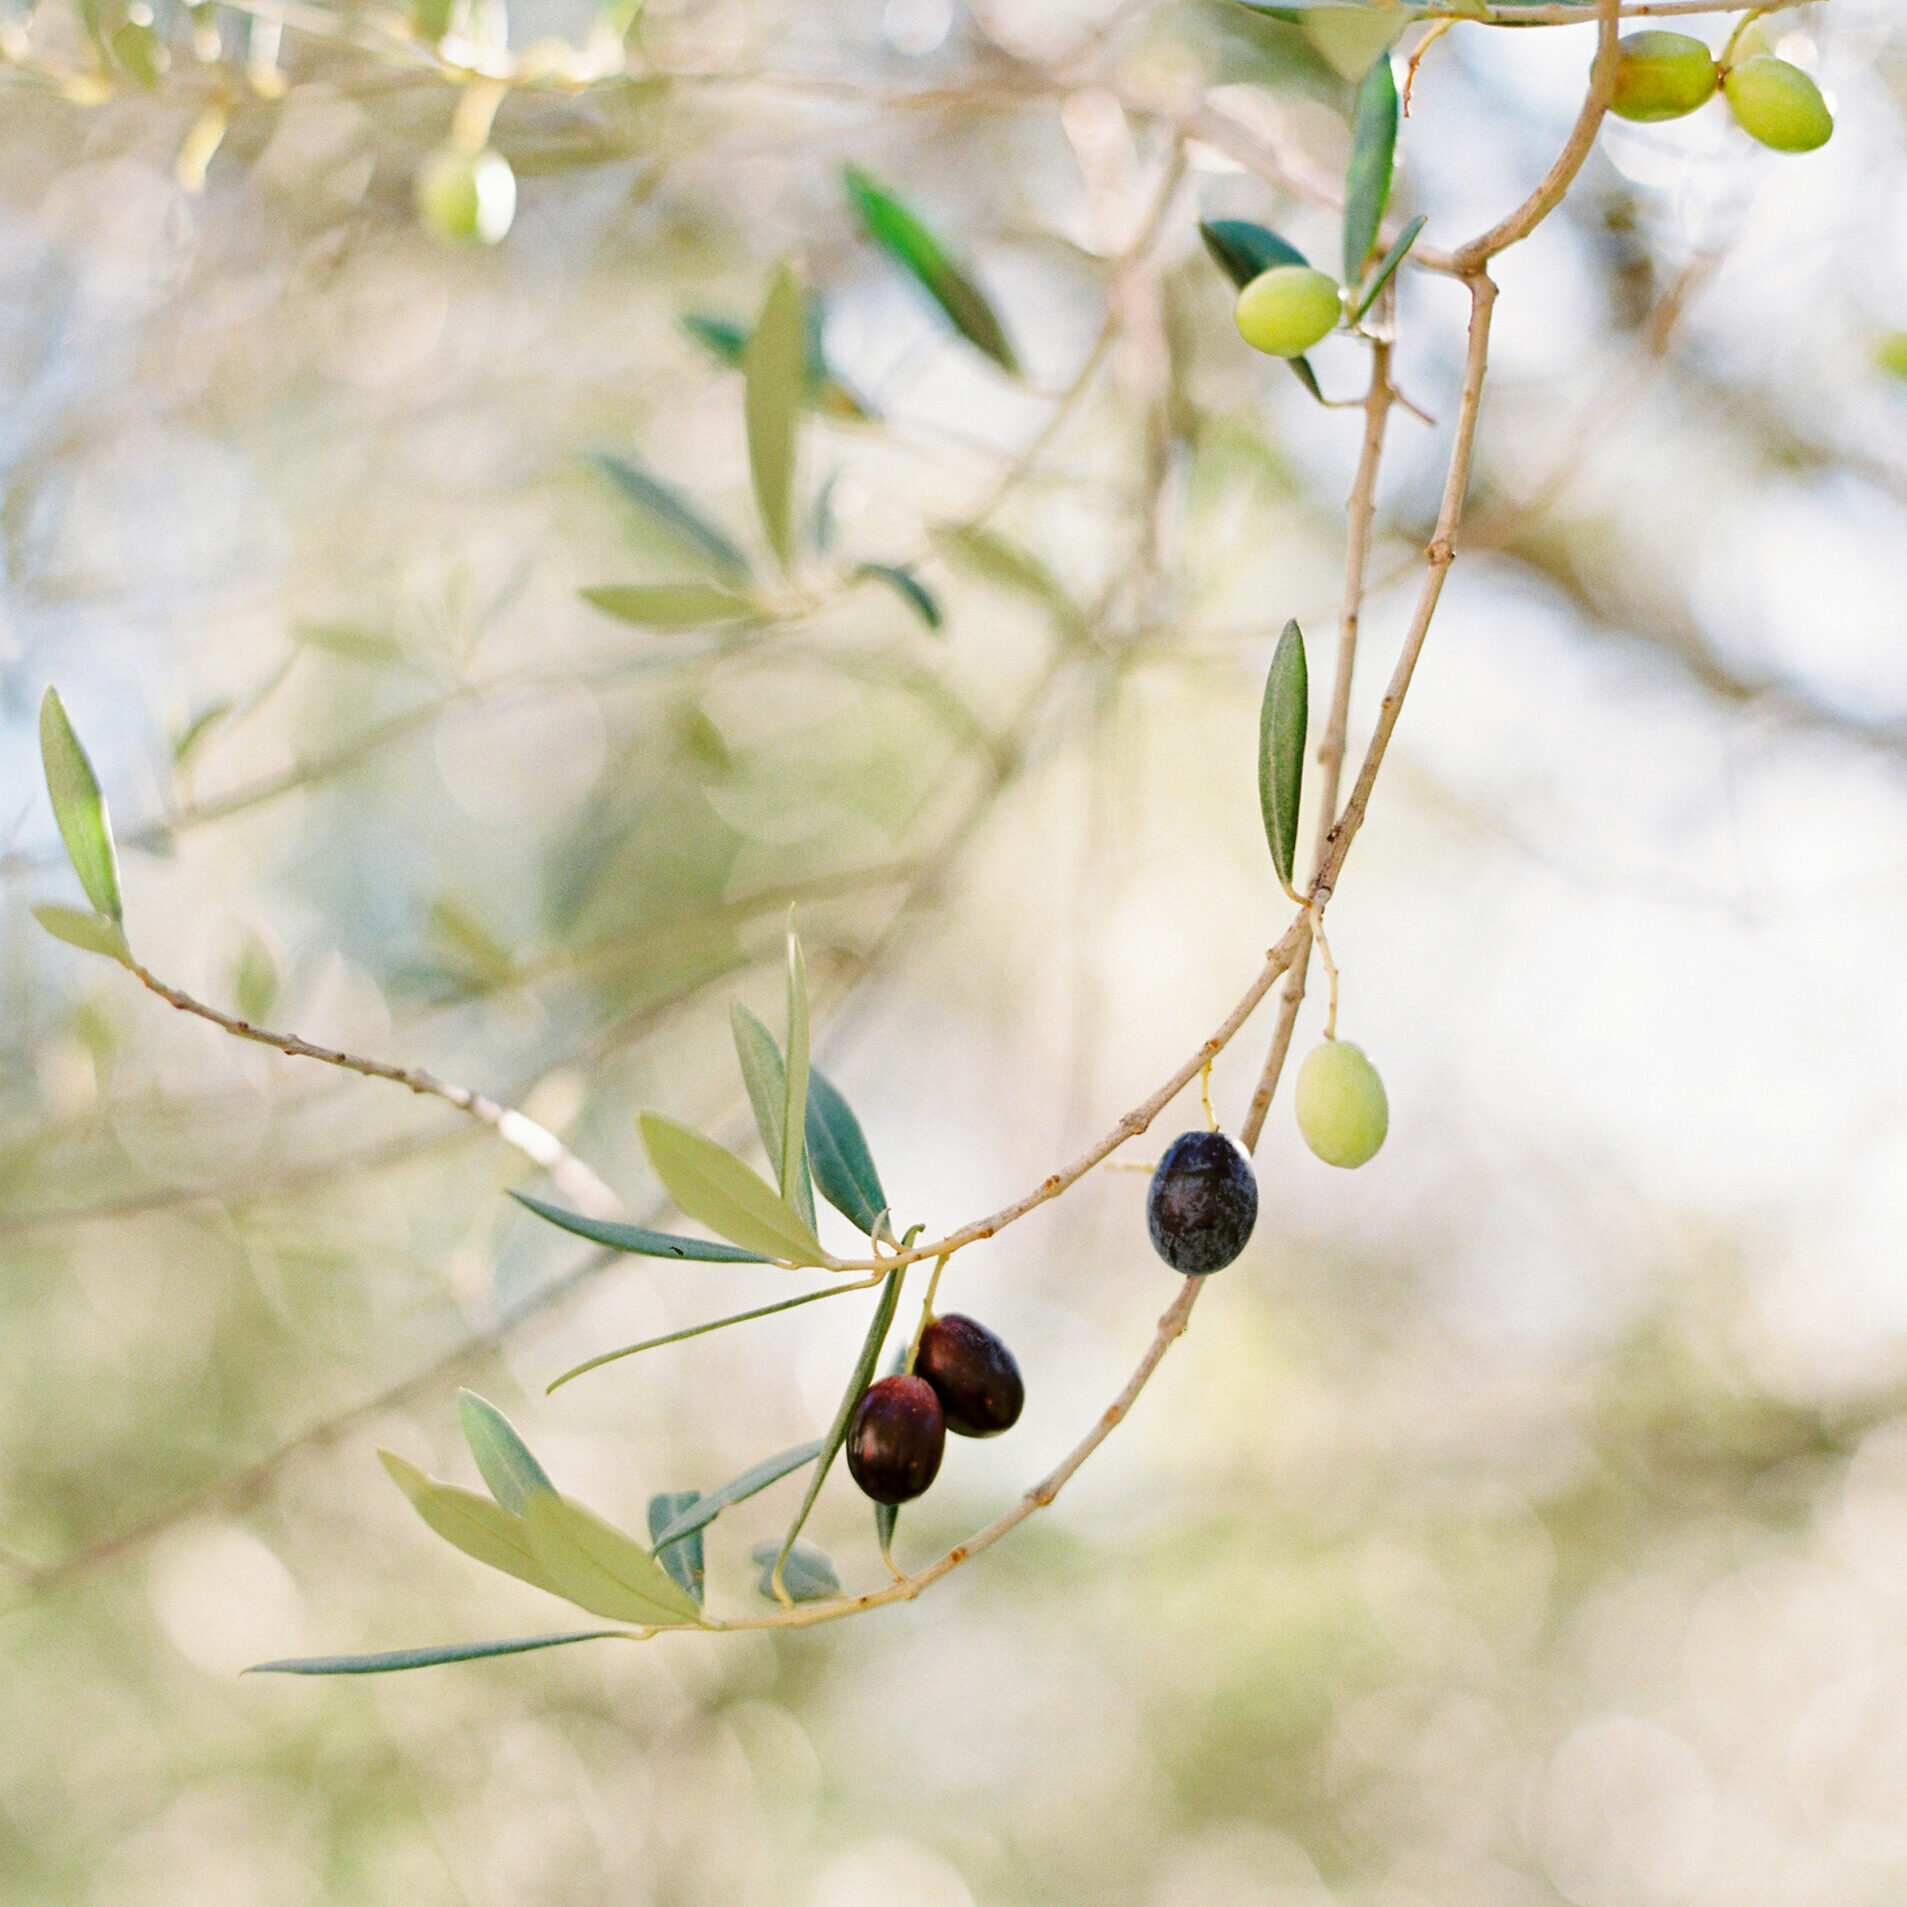 Simple stock photo of olives dangling from olive tree branch. Perfect image image for Mediterranean tourism and travel agents.